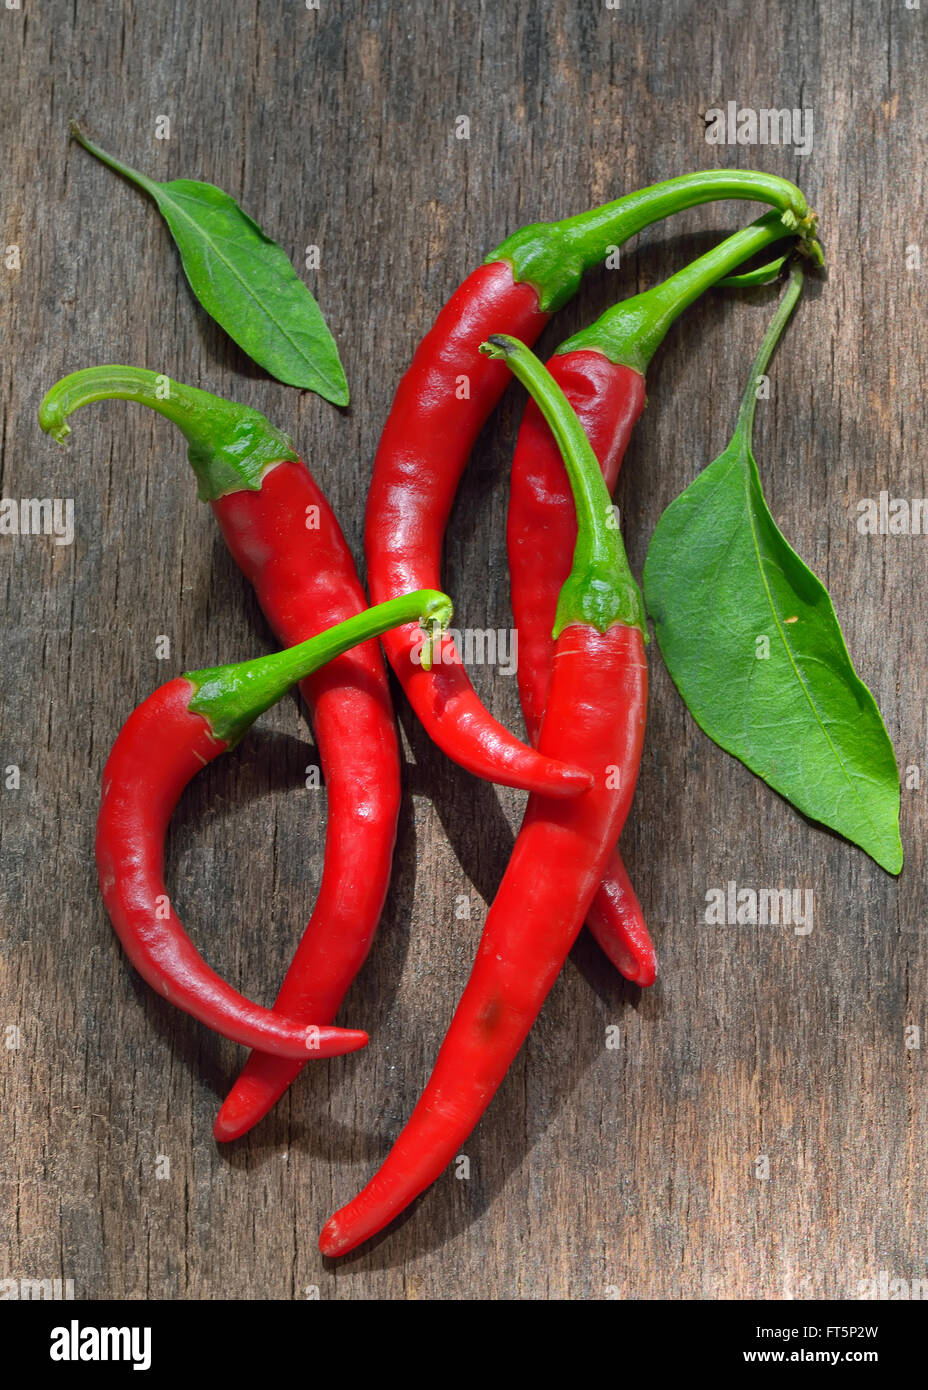 Red Chili Peppers over wooden background Stock Photo